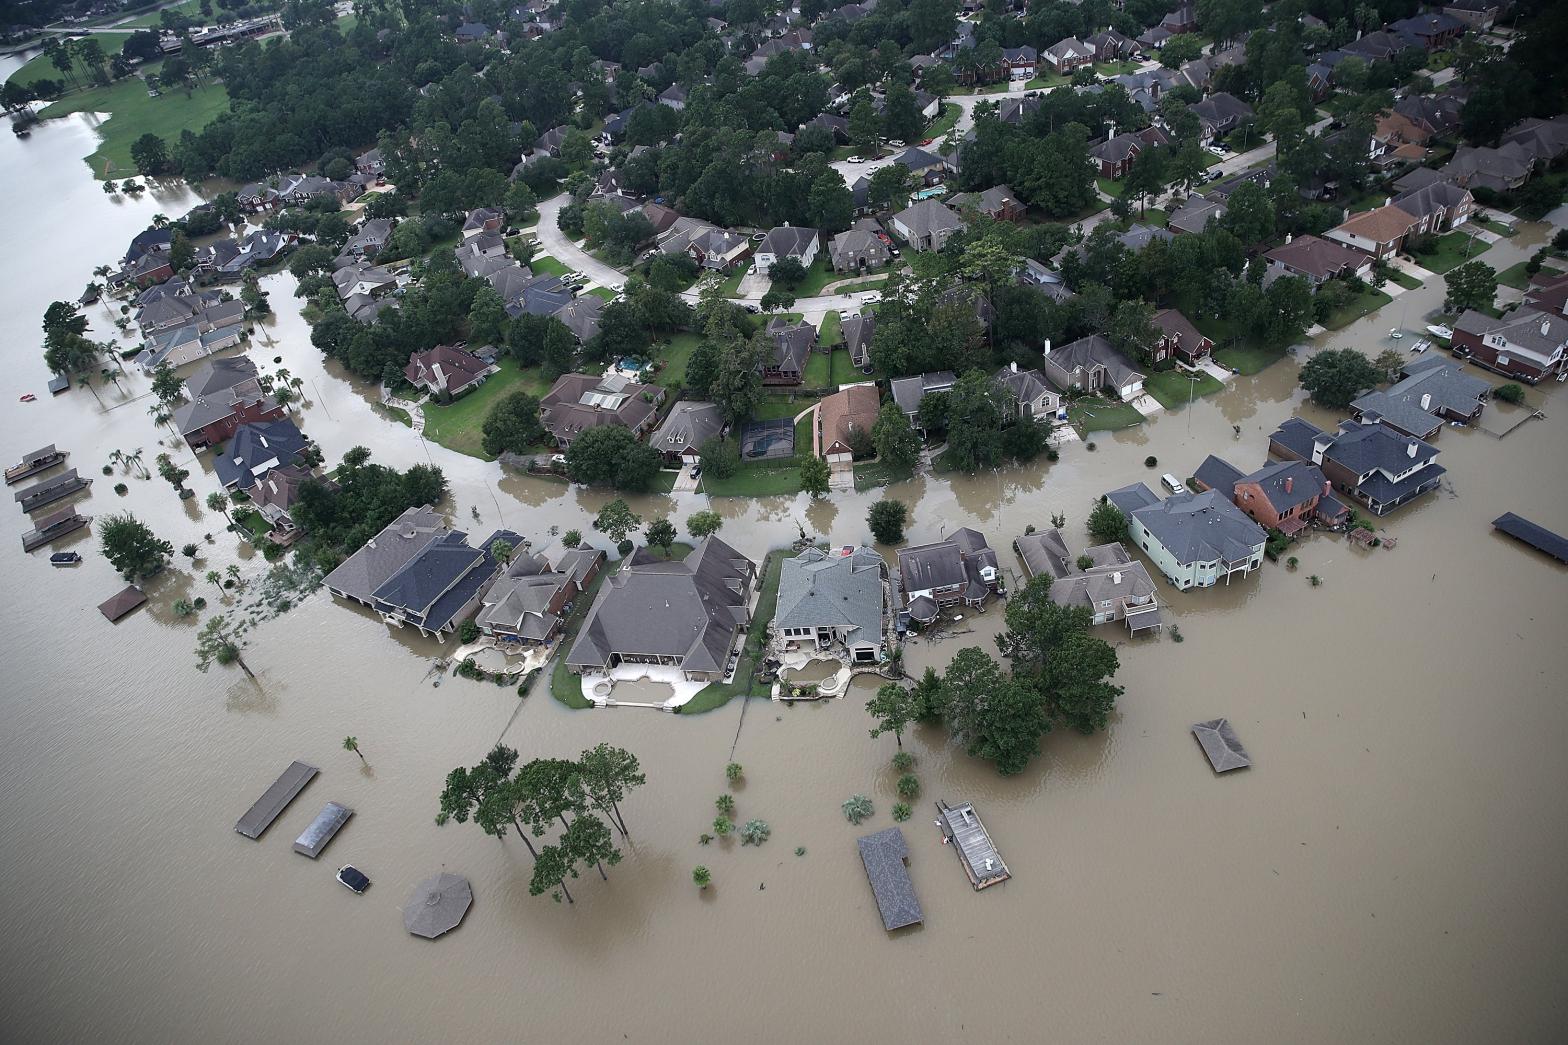 Flooded homes following Hurricane Harvey in Houston, Texas, August 30, 2017. (Photo: Win McNamee, Getty Images)